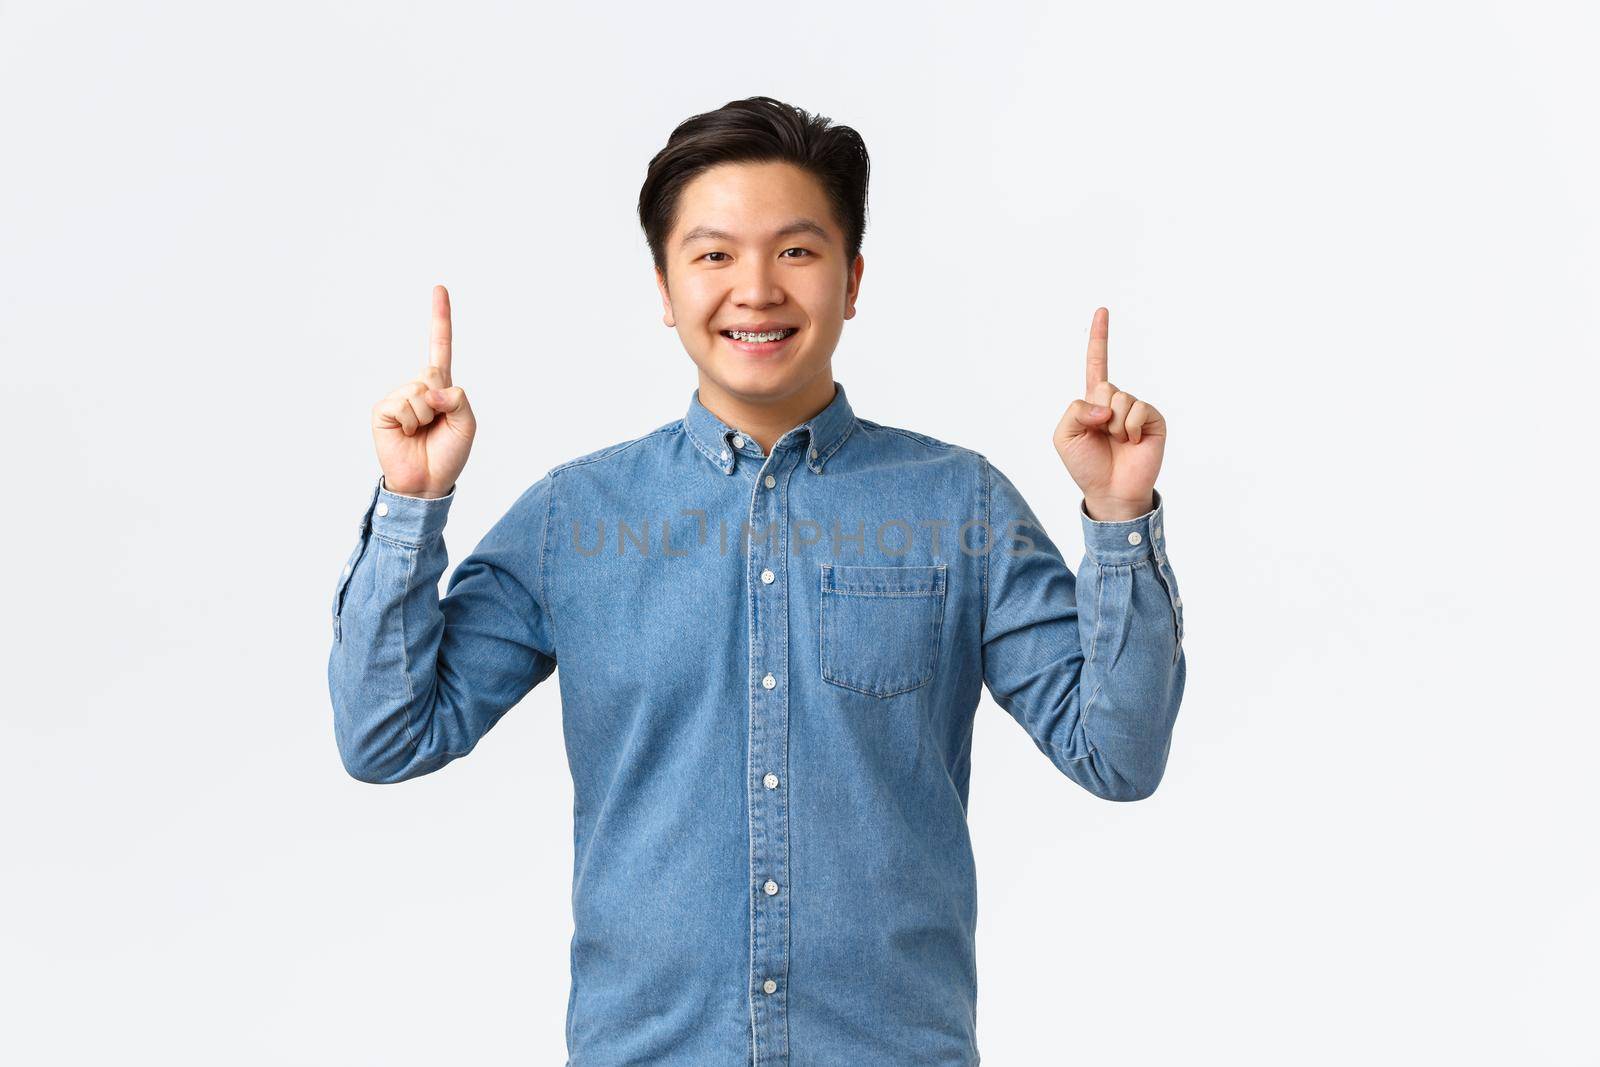 Smiling proud and happy asian male model in blue shirt making announcement, pointing fingers up at banner, recommend buy product, click link, e-commerce and advertisement concept.